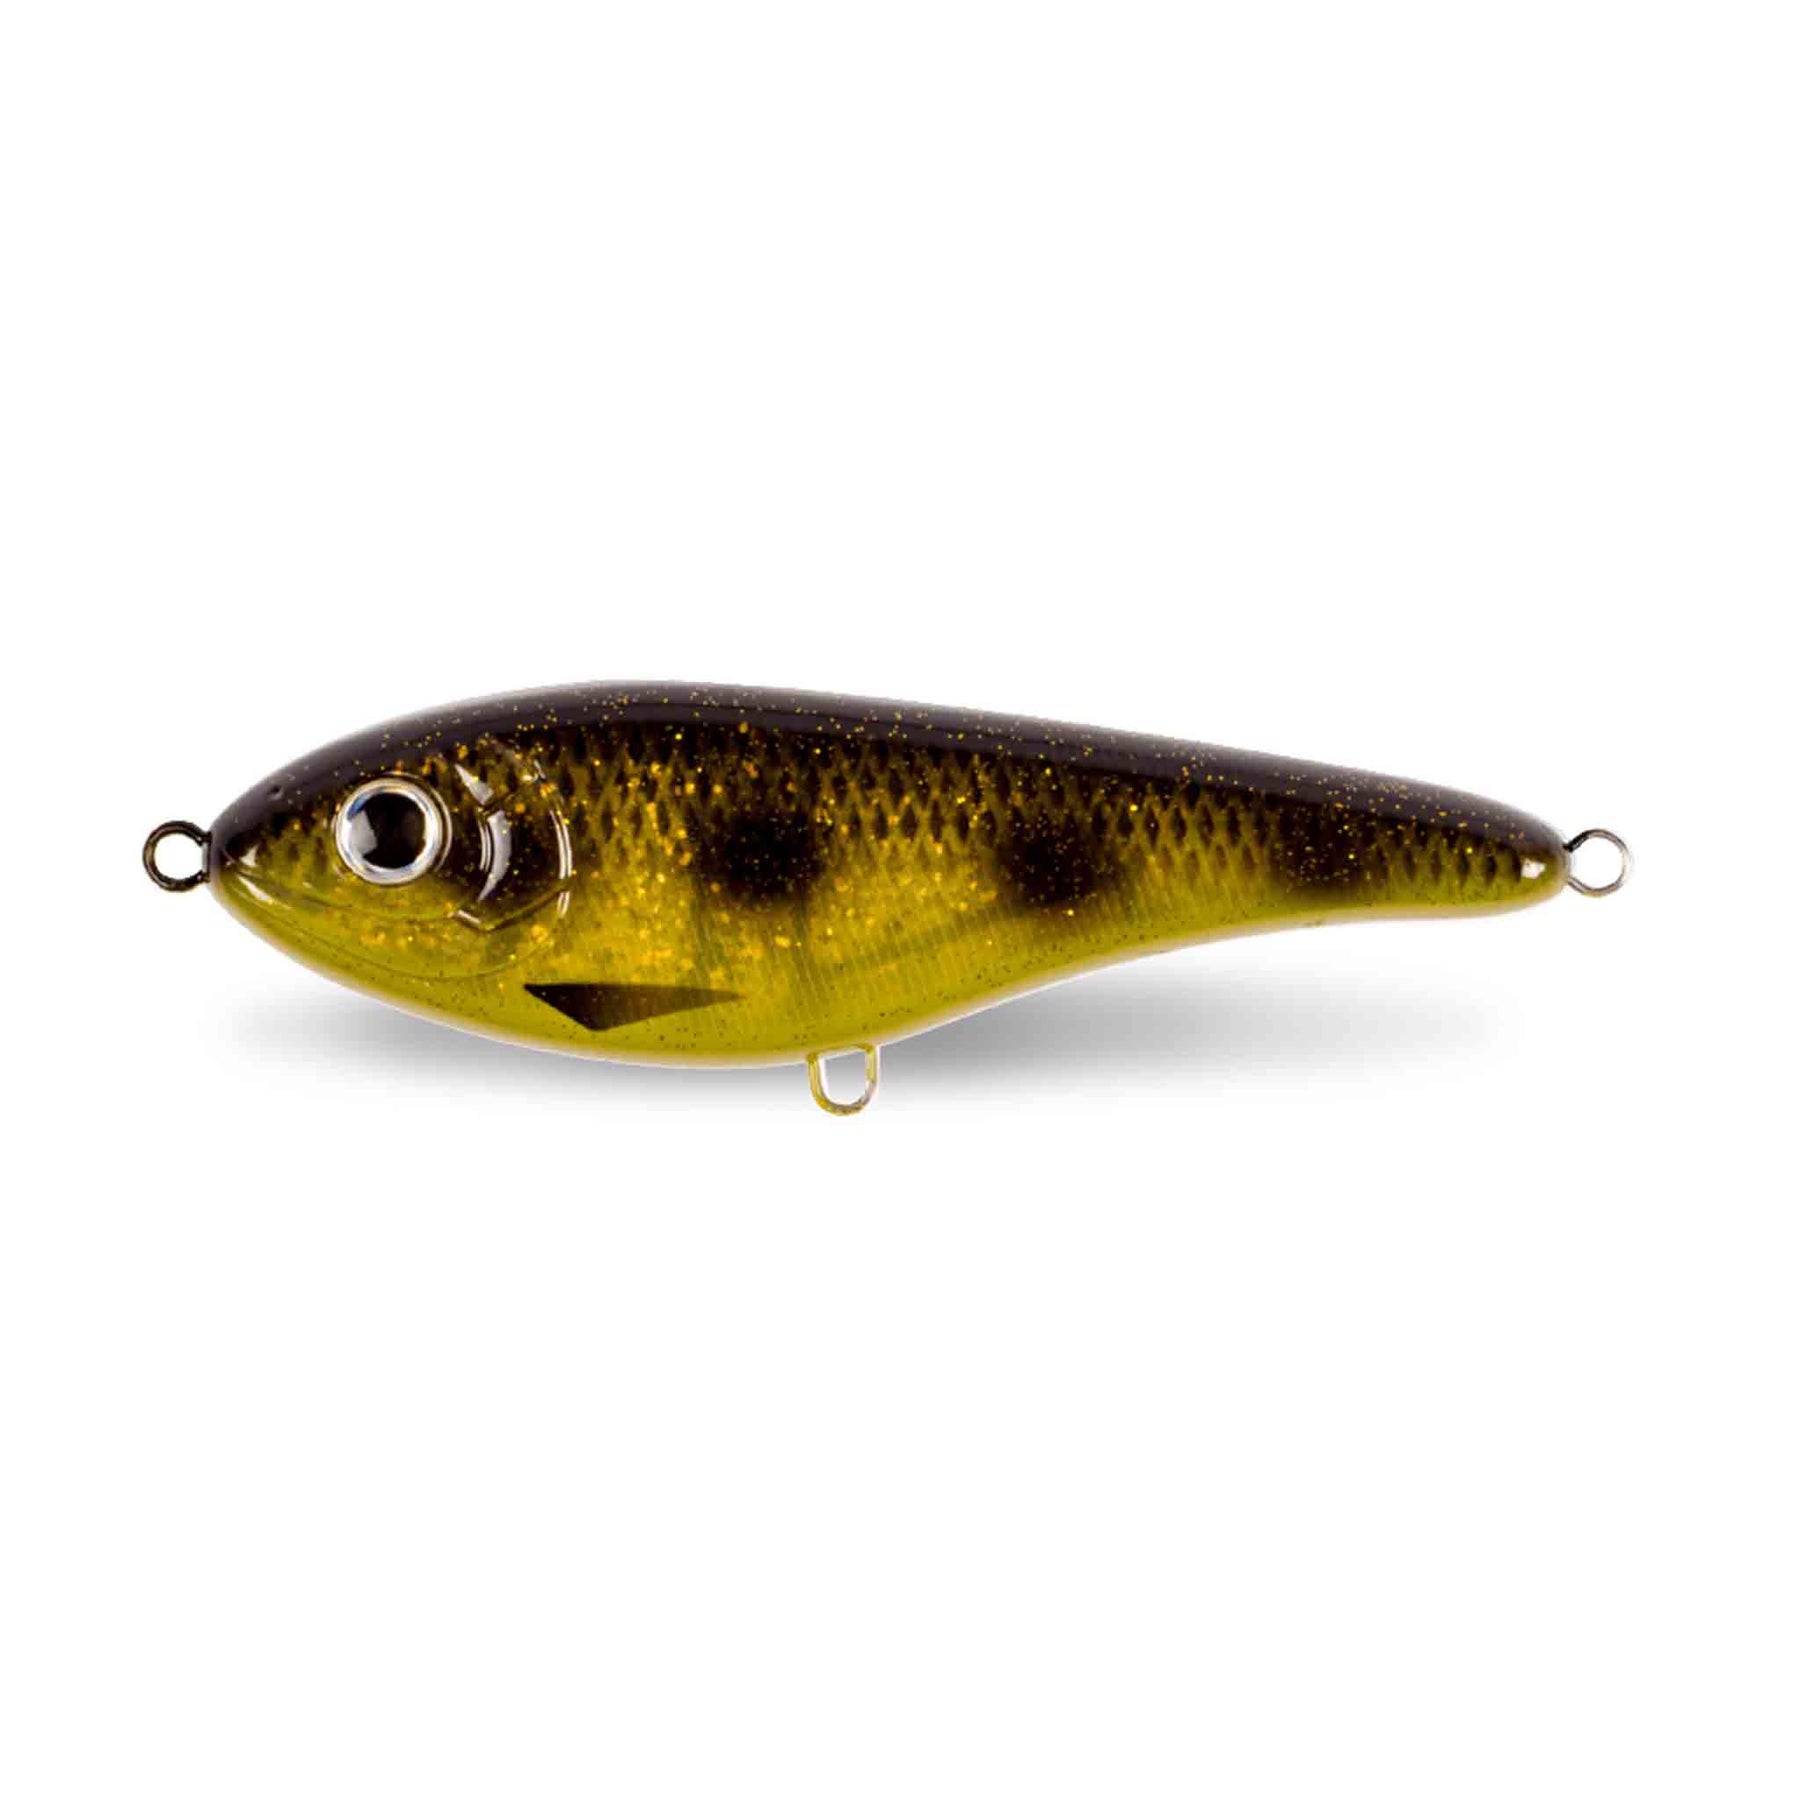 View of Jerk-Glide_Baits Strike Pro Buster Jerk Shallow Glide Bait Spotted Bullhead available at EZOKO Pike and Musky Shop